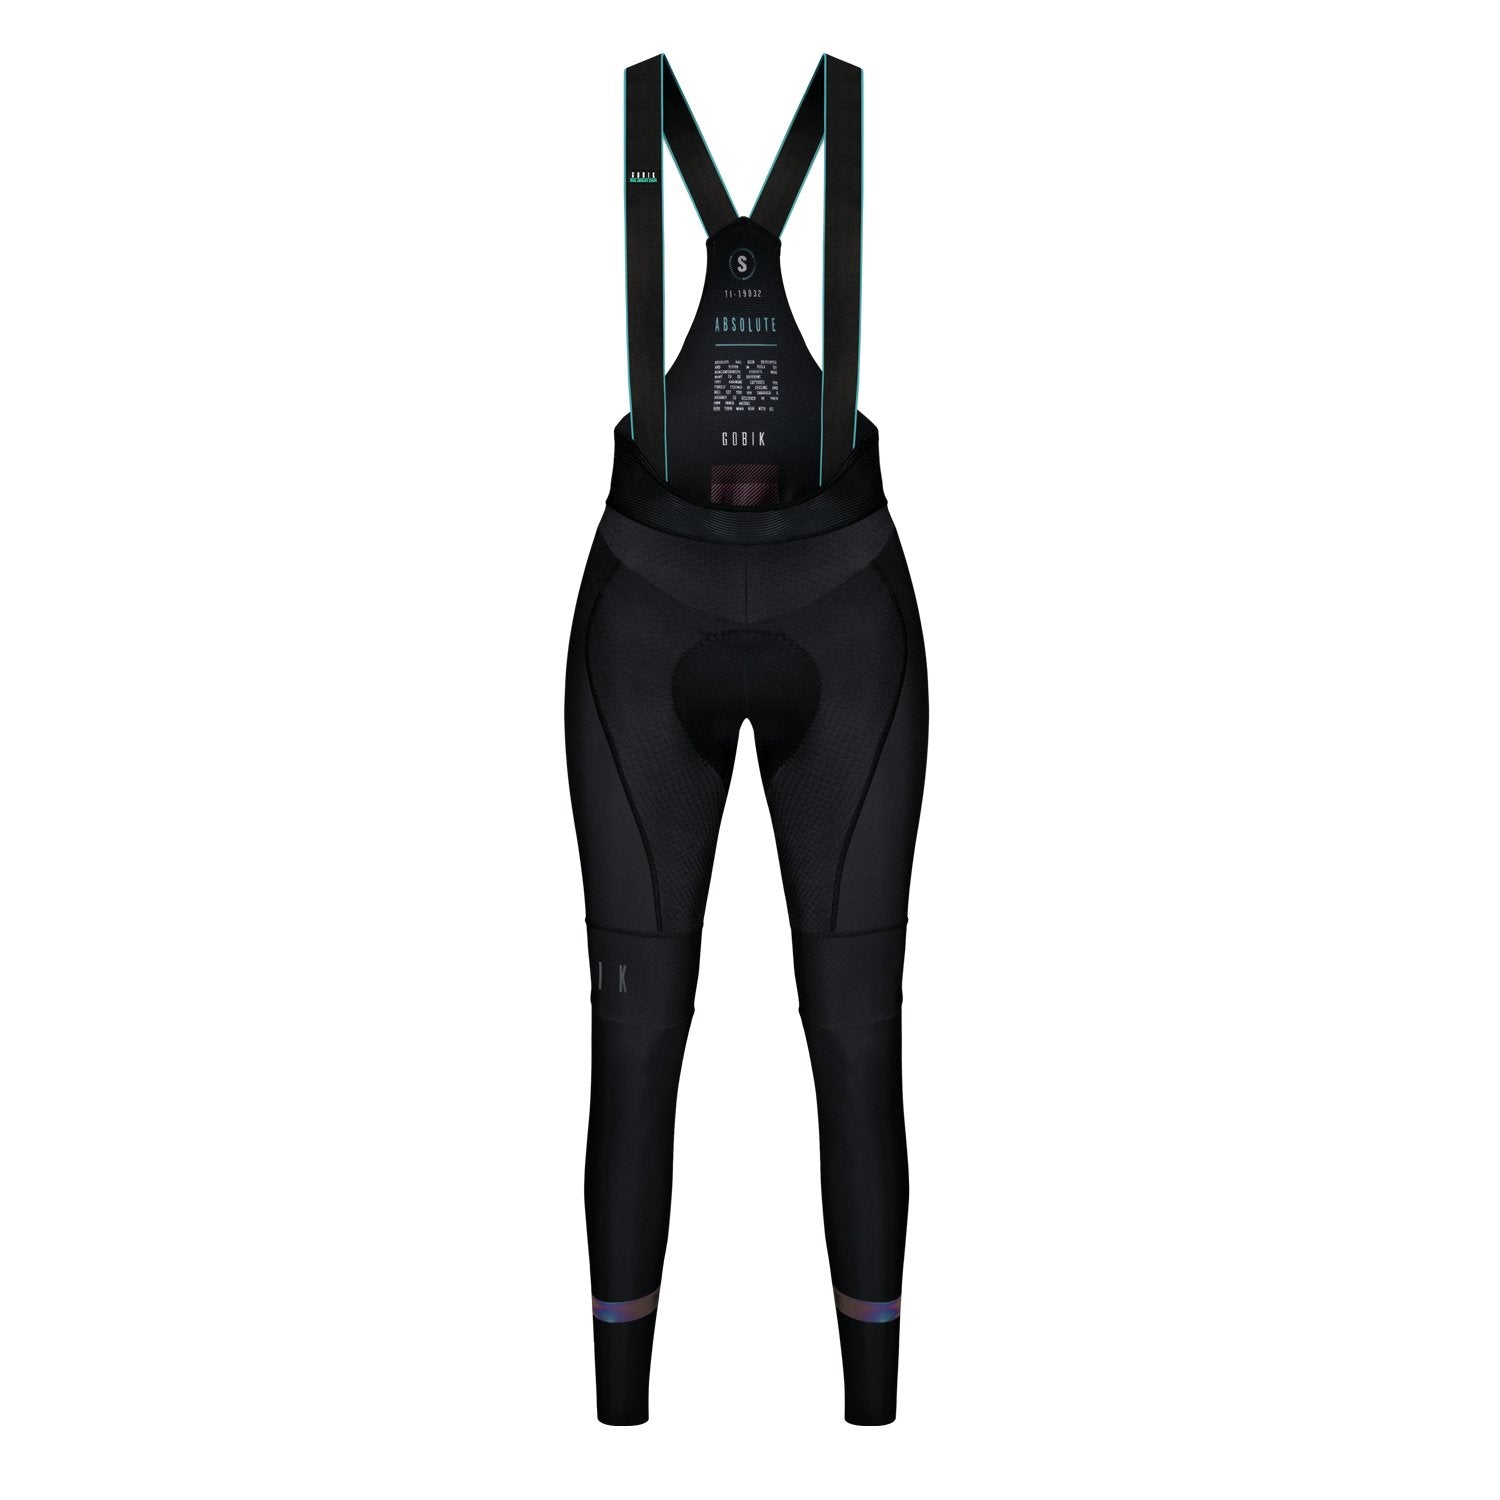 CULOTTE MUJER LARGO ABSOLUTE 4.0 K10 - veloboutiquecl